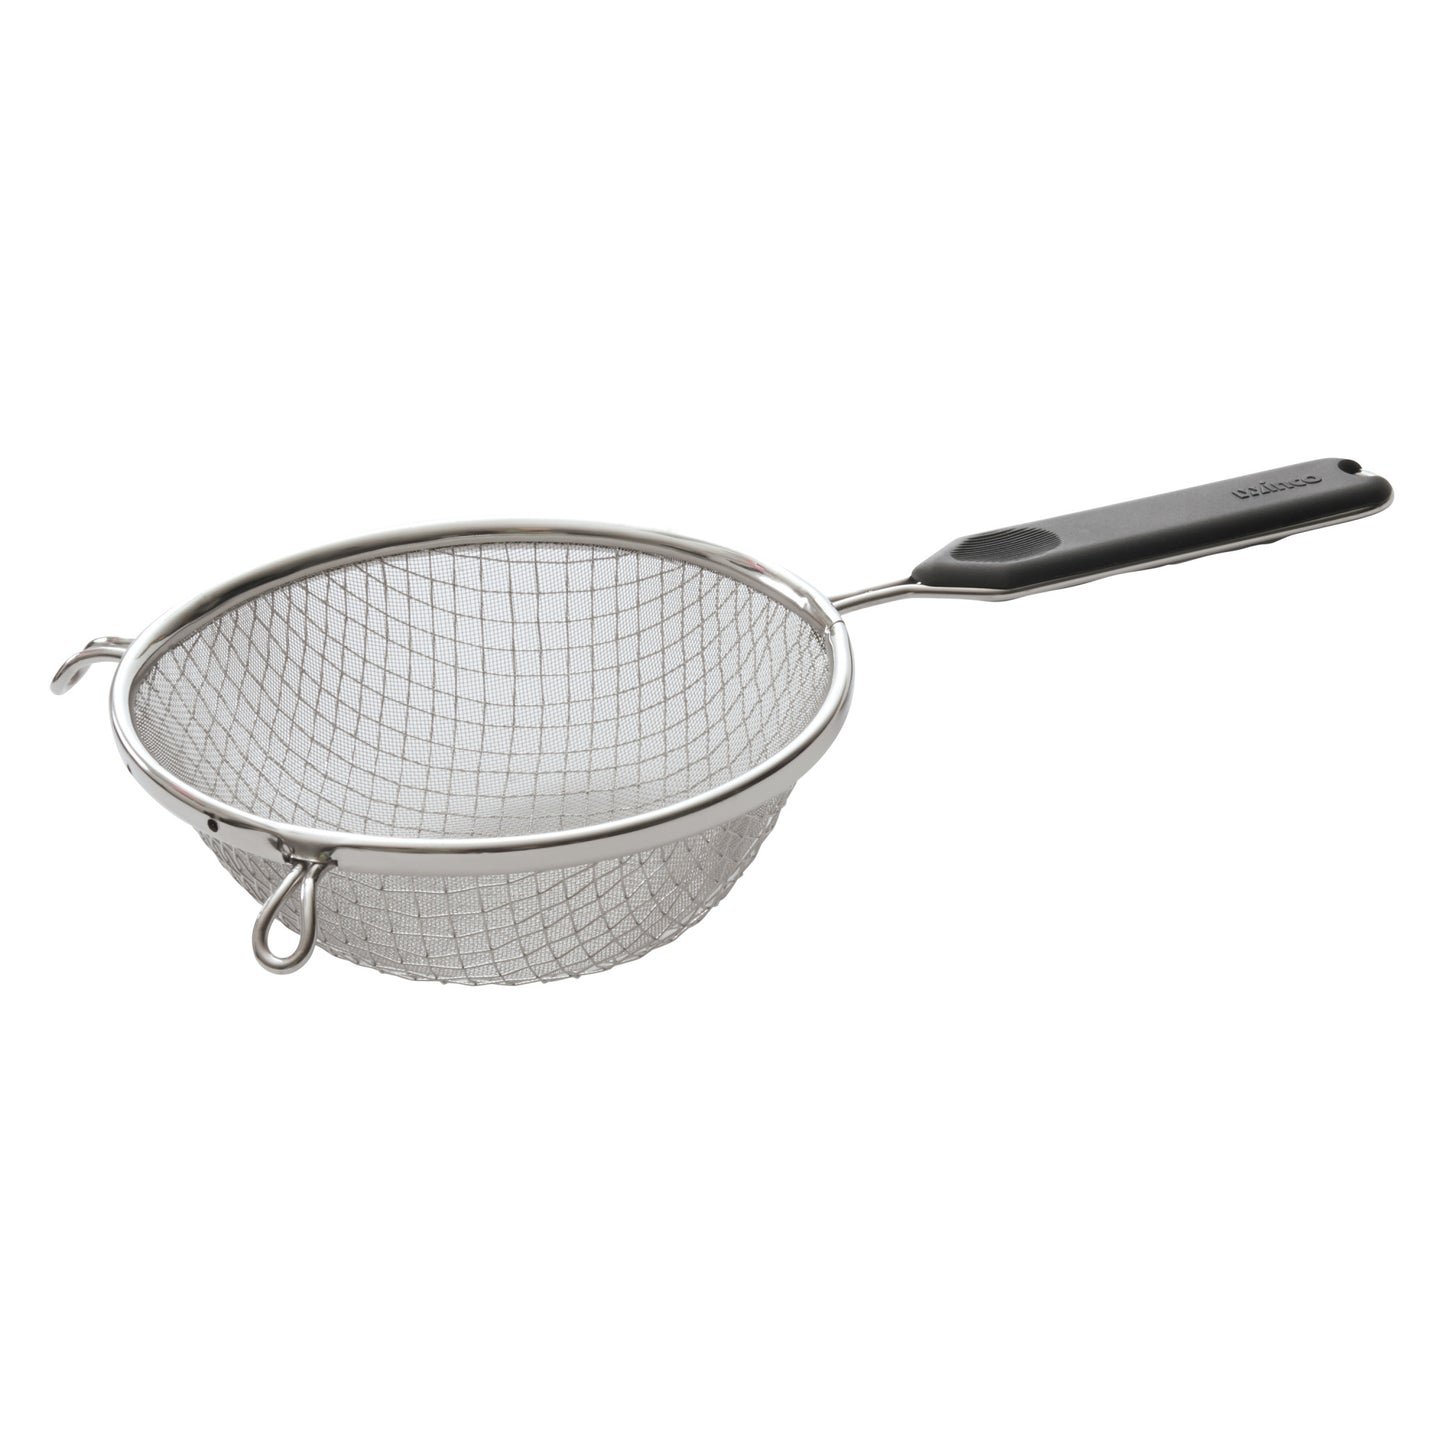 MSTP-6DF - 6-1/4" Double Fine Mesh Strainer with Plastic Handle